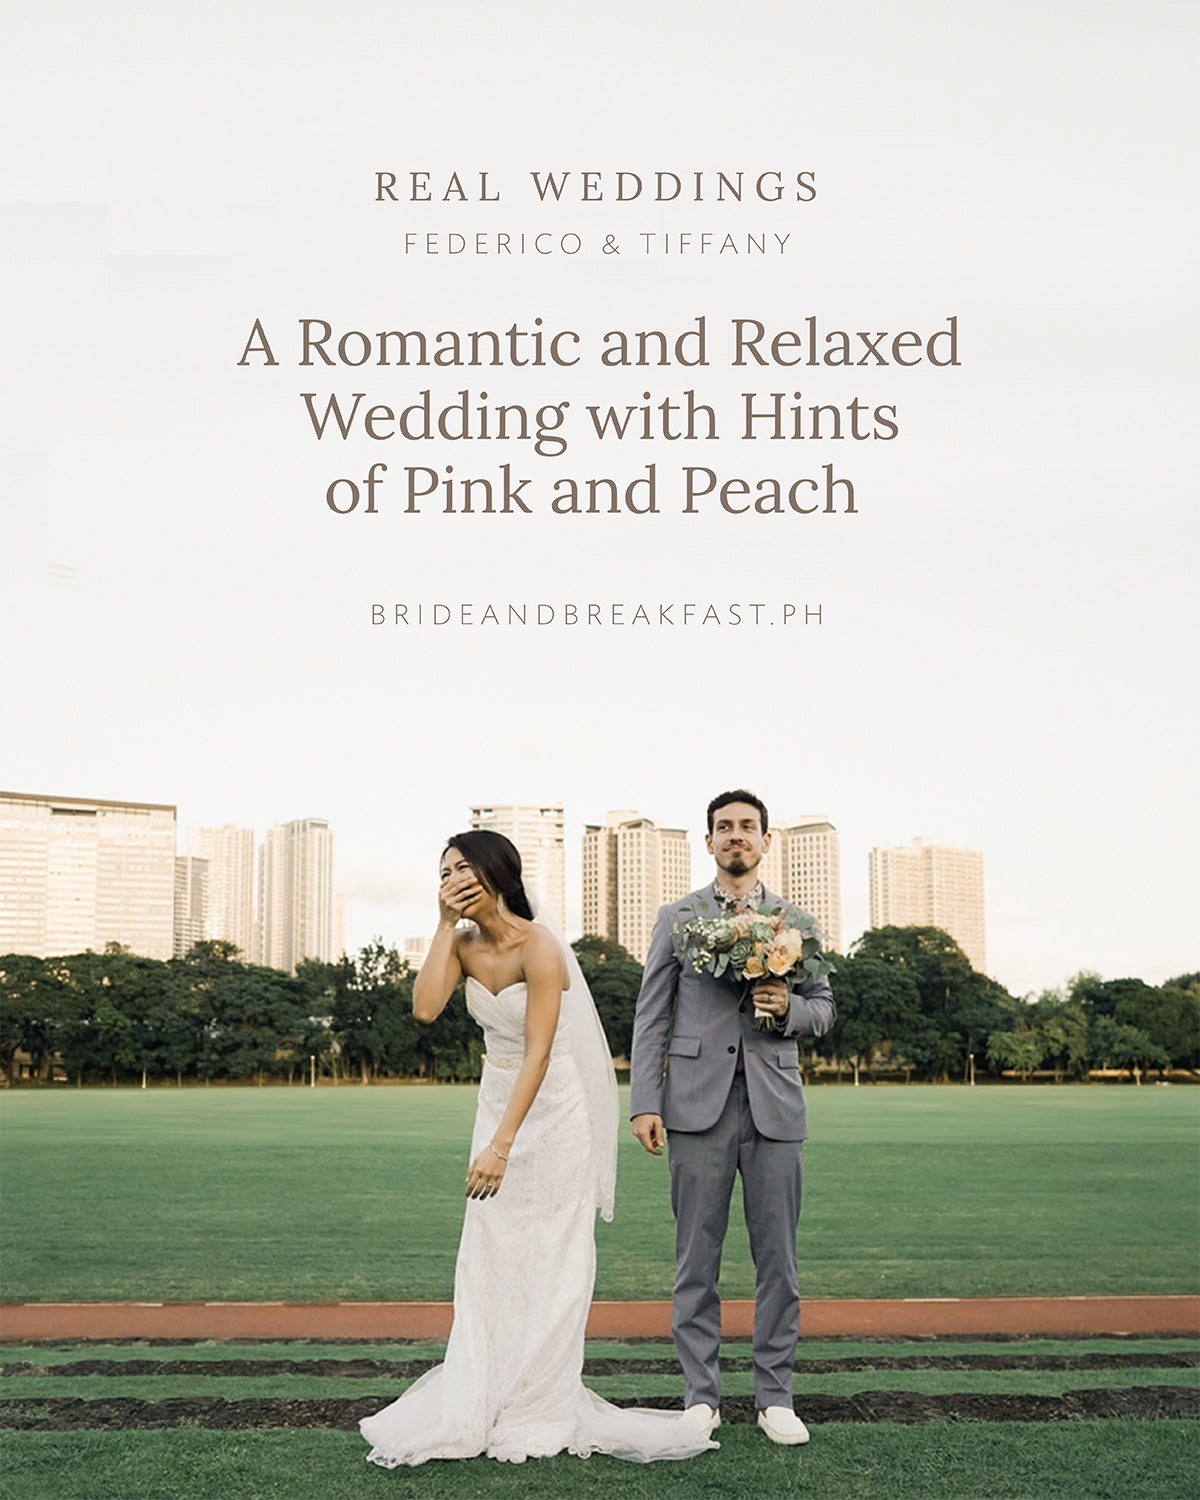 A Romantic and Relaxed Wedding with Hints of Pink and Peach